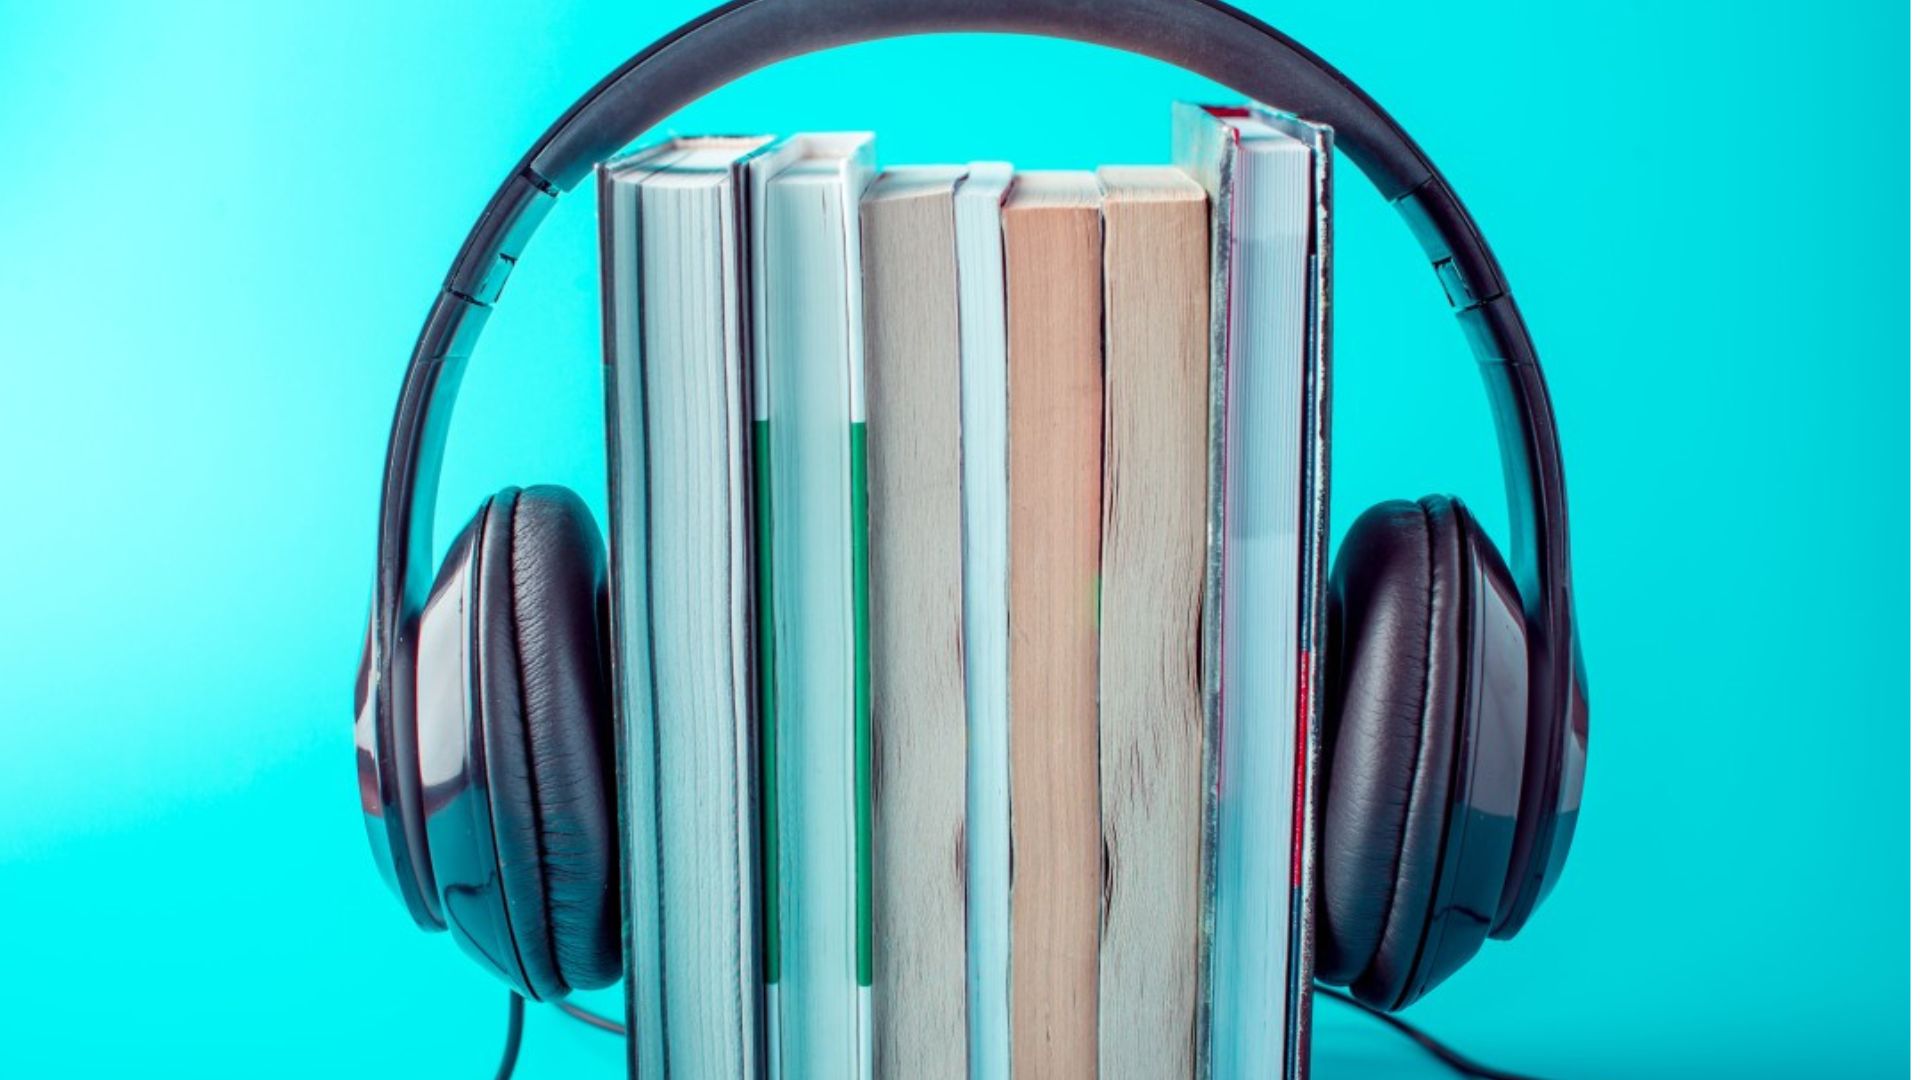 A Pair of Headphones and Books